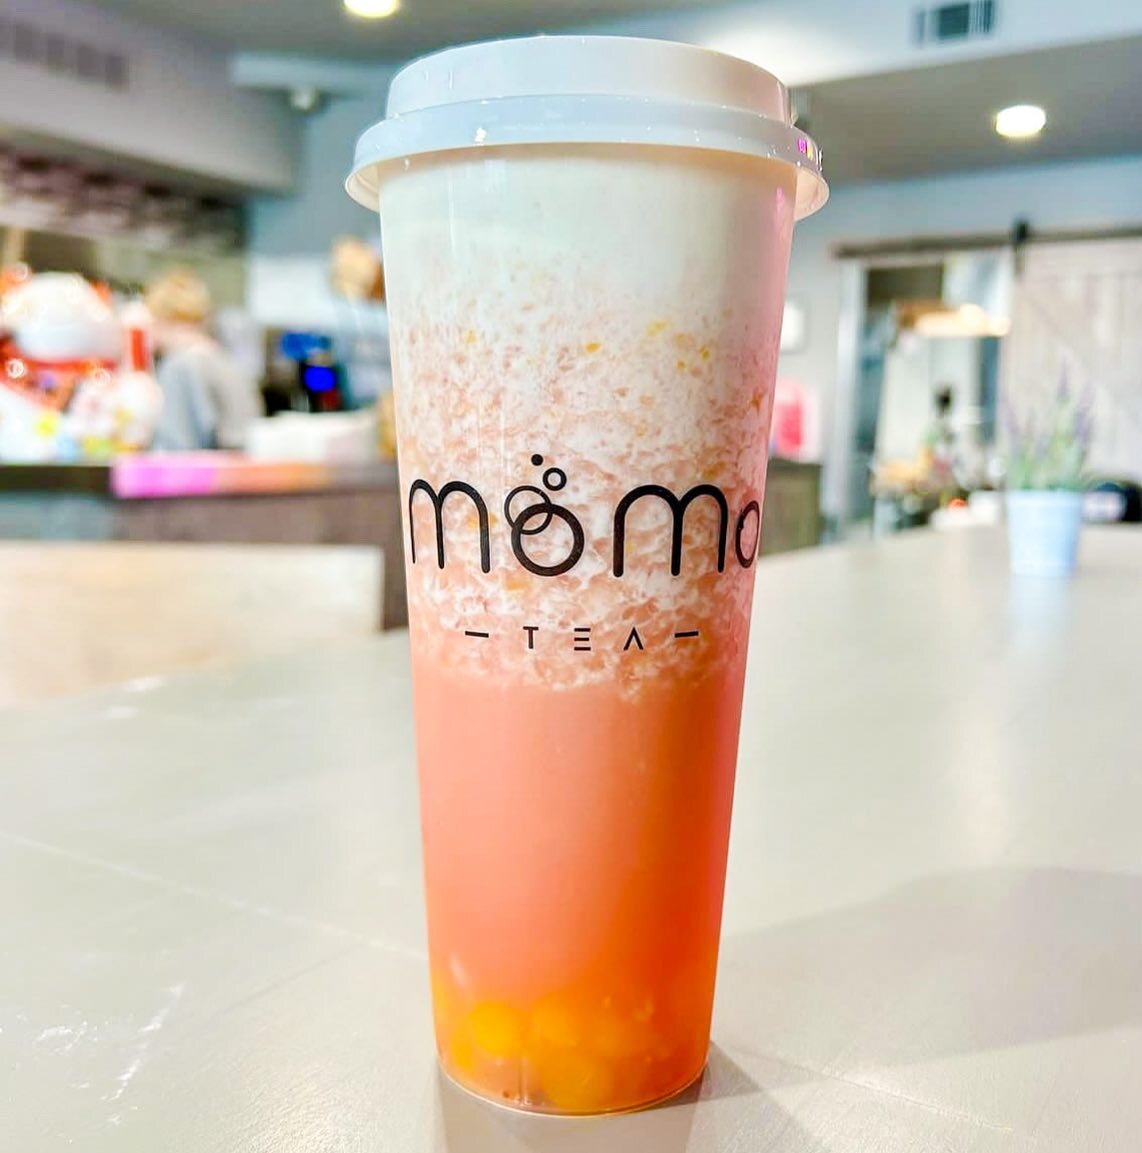 &ldquo;One of my go-to drinks when I go to @momotea_br ! It&rsquo;s sweet, fruity, refreshing and delicious! I rarely get lychee when I go to boba shops because they taste too overwhelmingly sweet and syrup-y. Momo&rsquo;s is the only one that I like